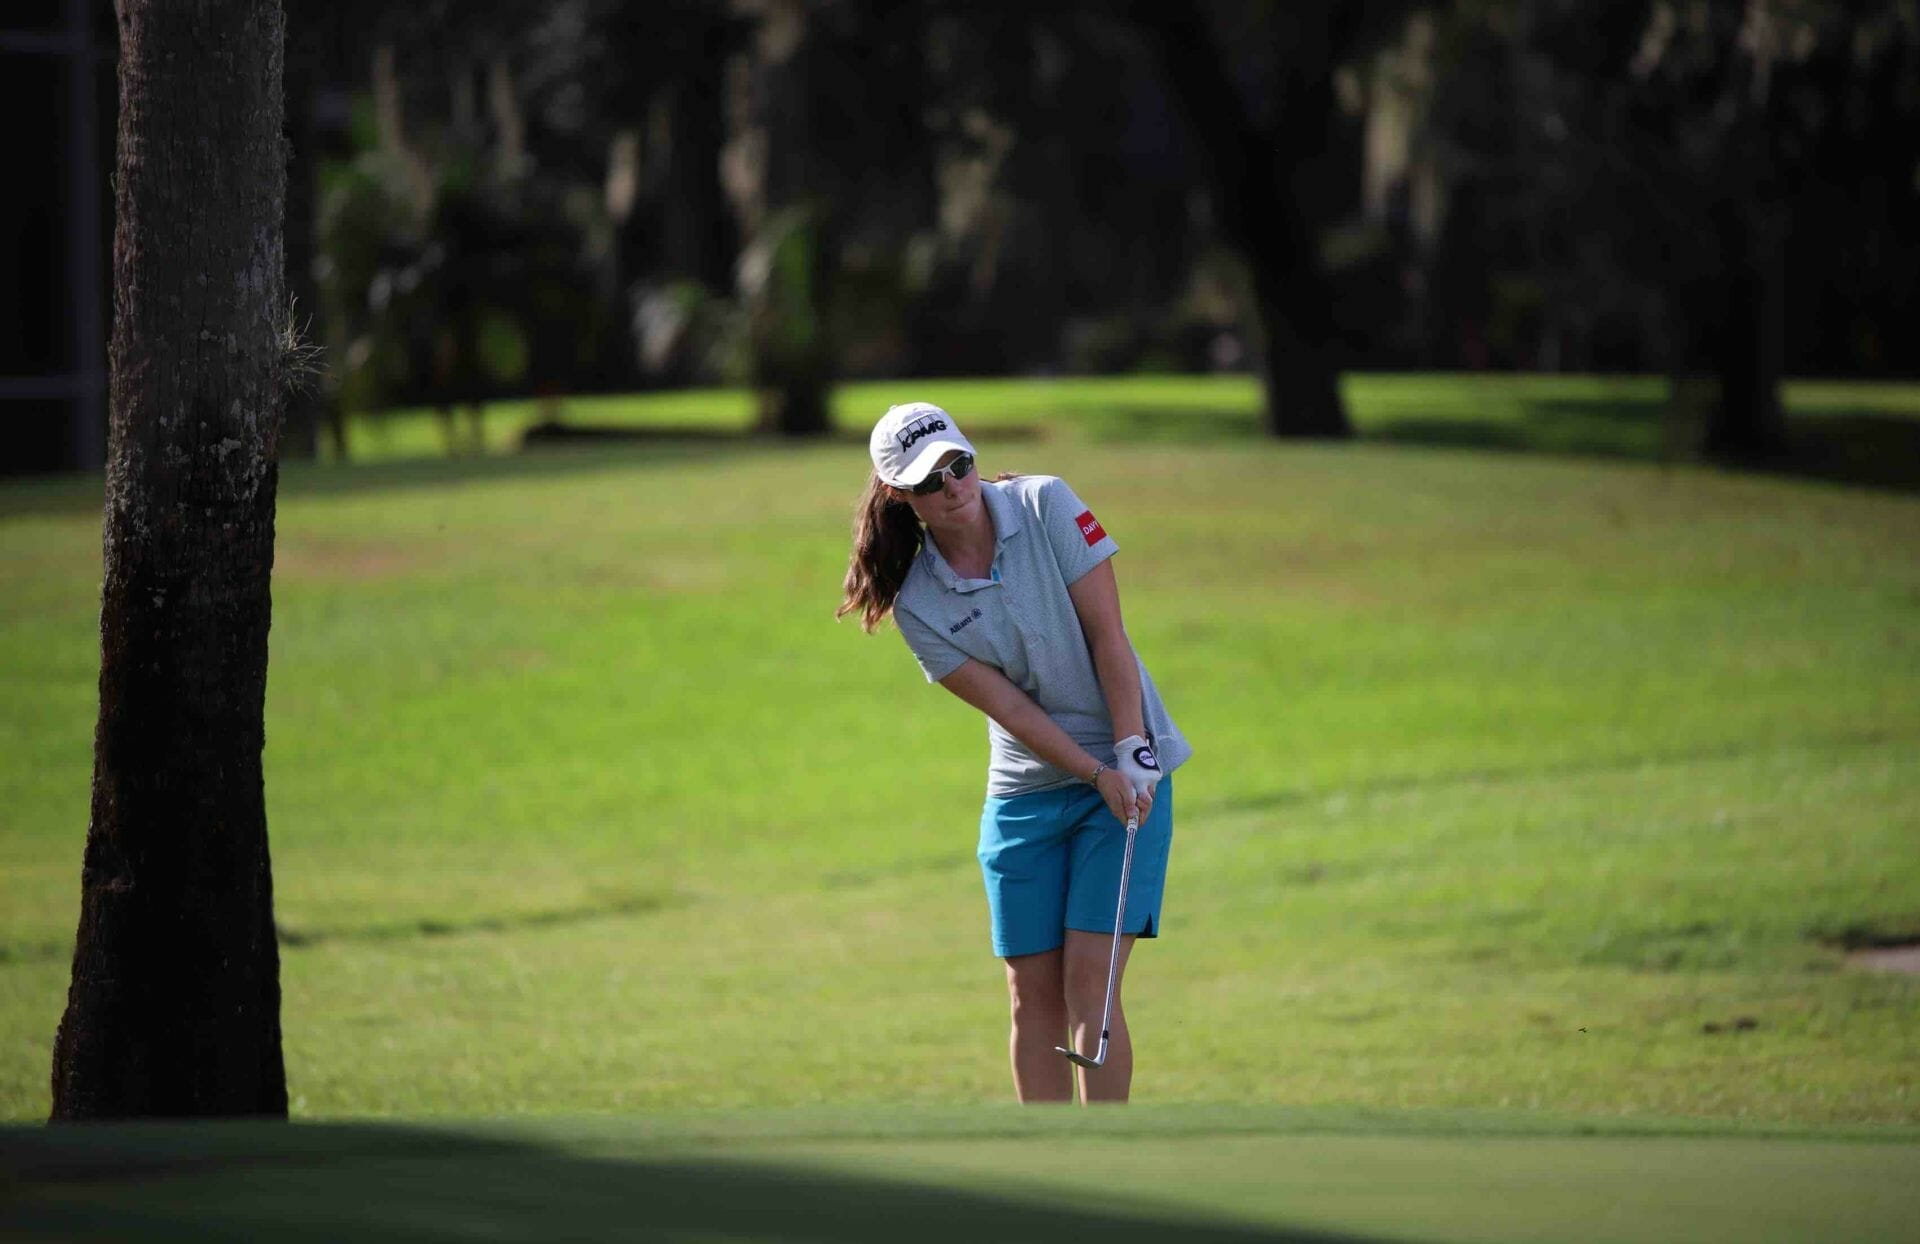 Maguire ties 21st as Kyriacou pulls off a Lowry in Bonville